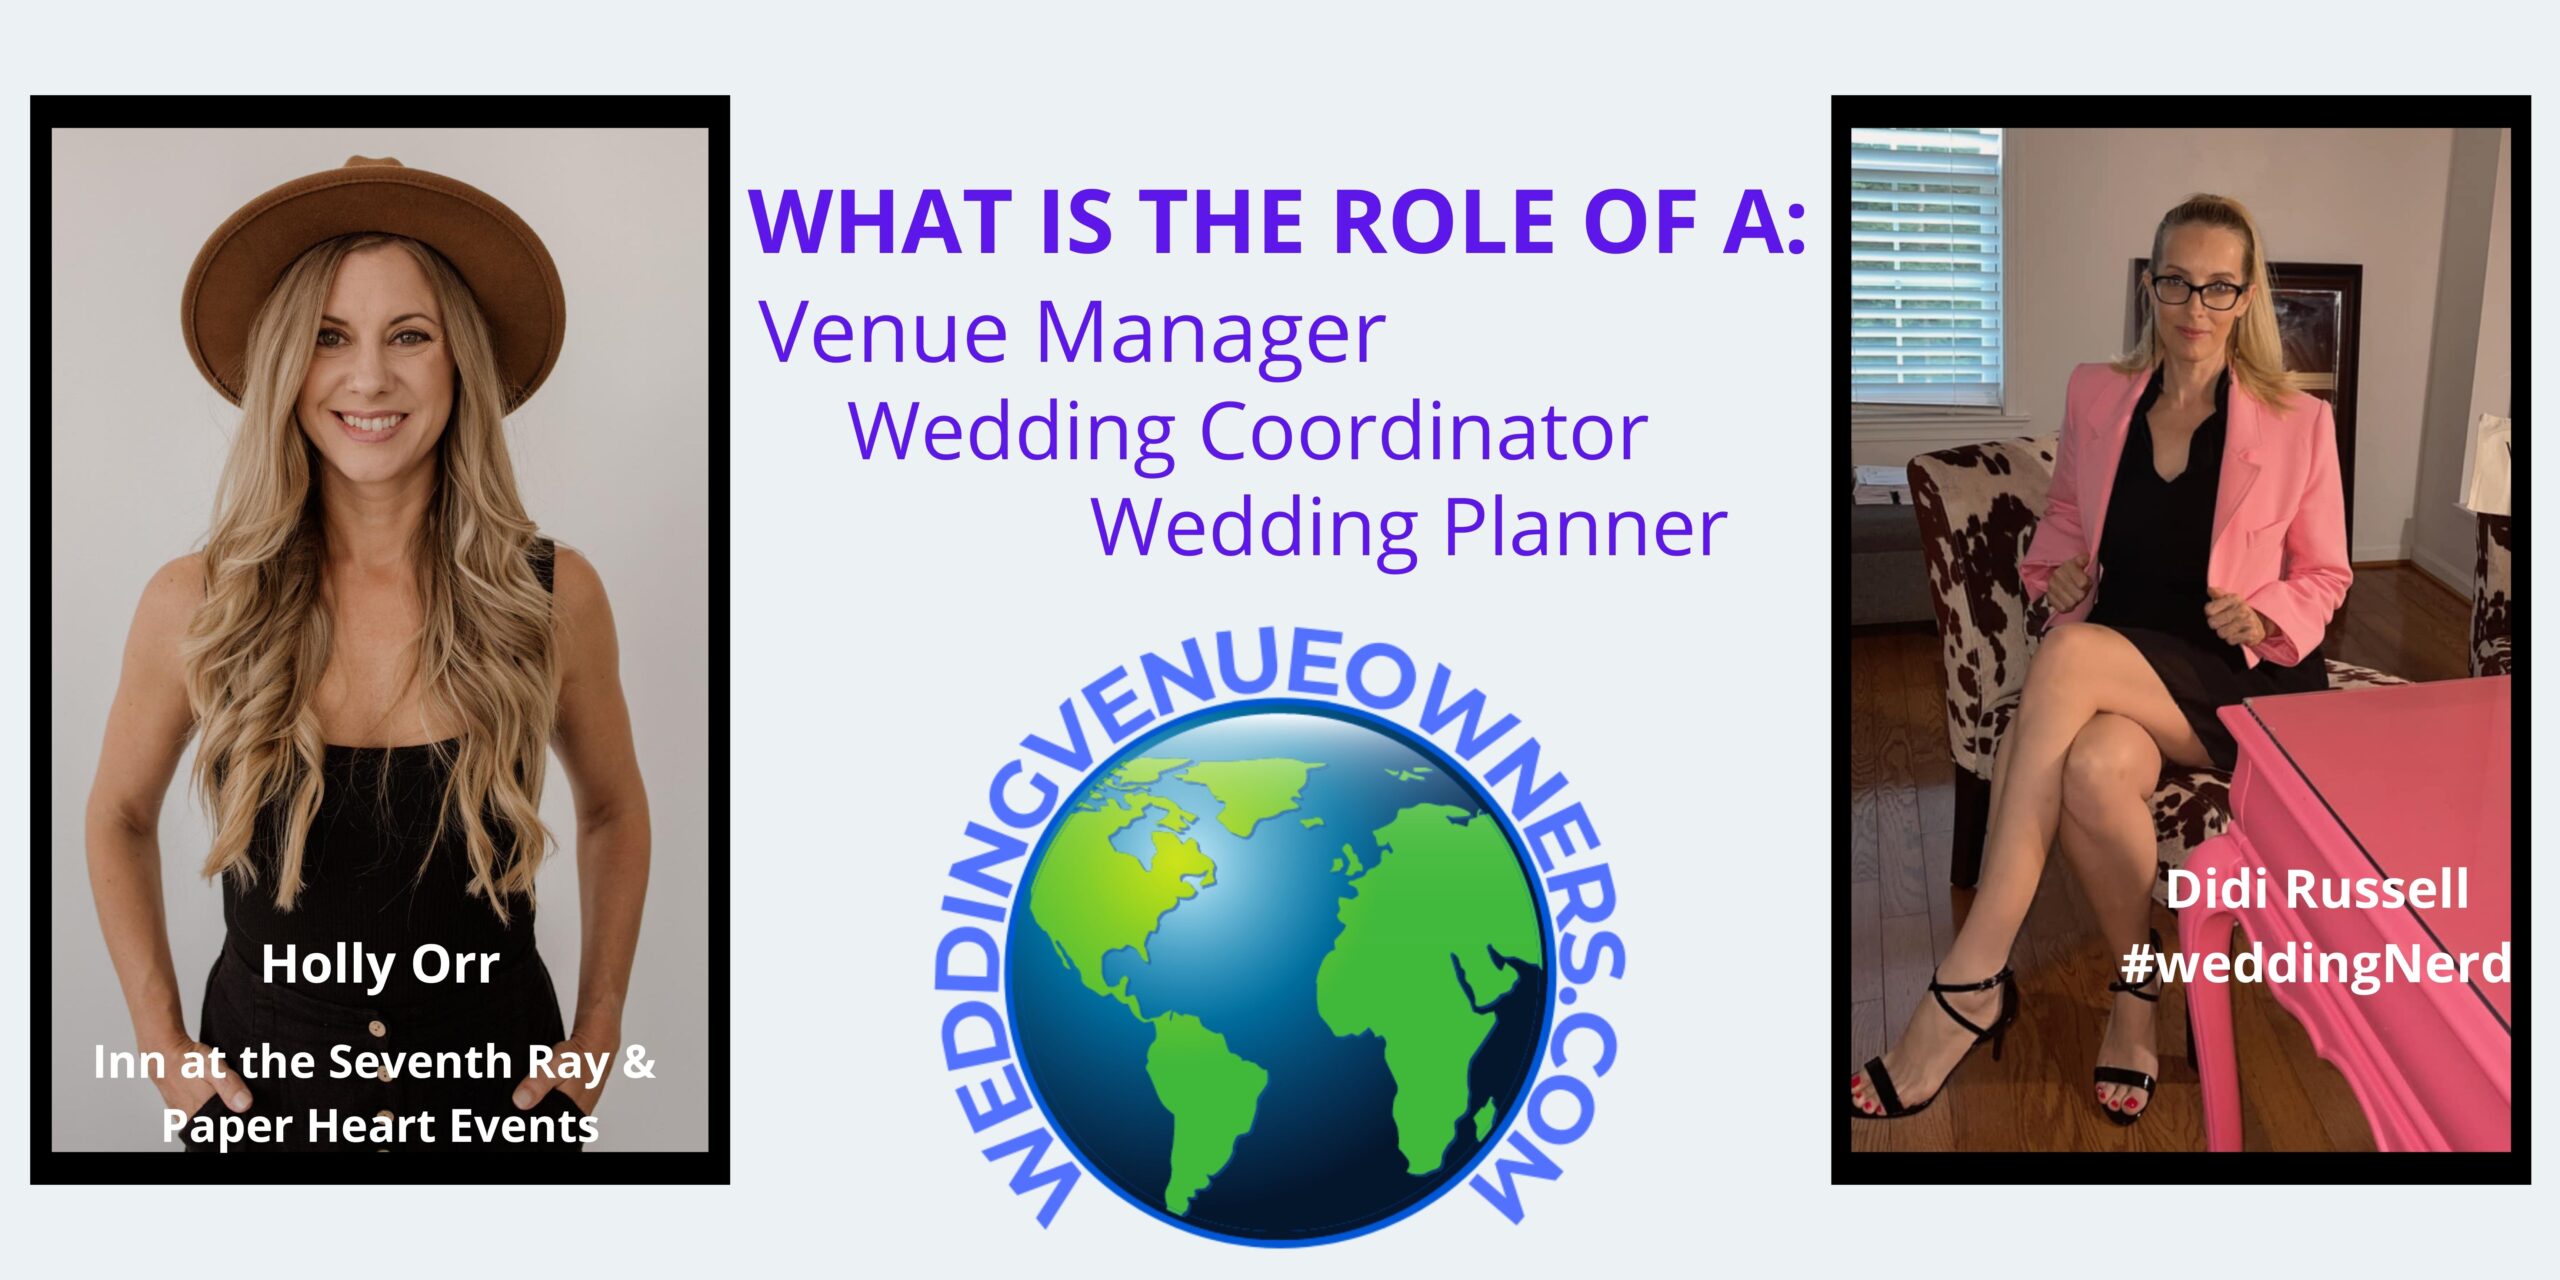 What is a wedding planner